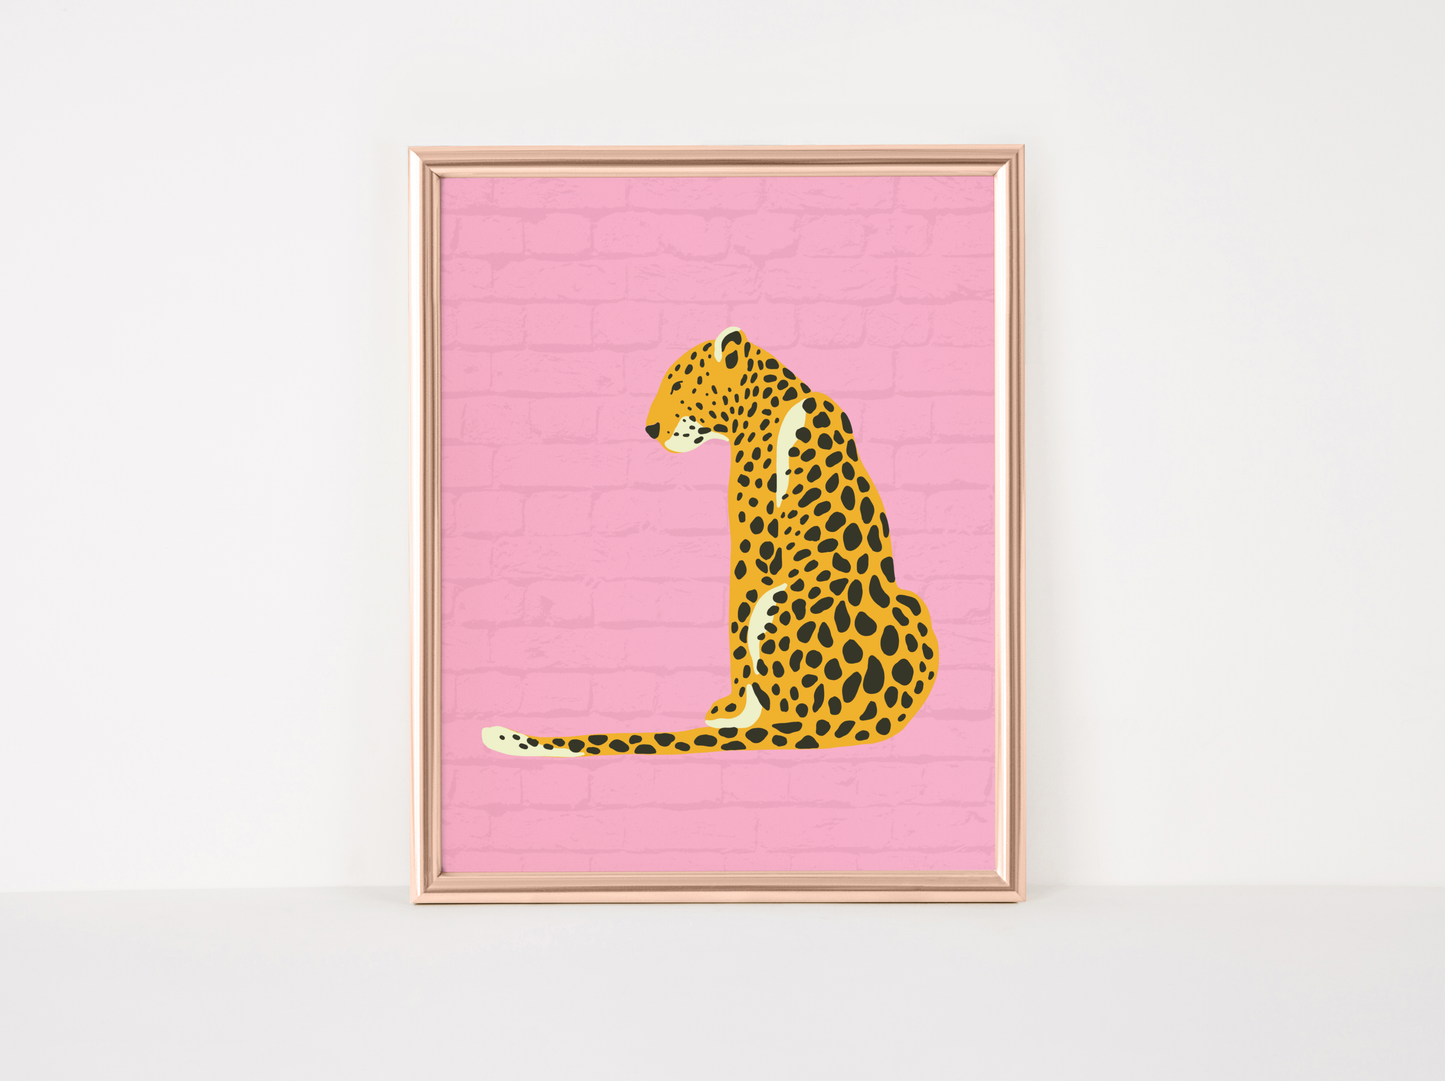 Leopard Against on Pink Brick Wall